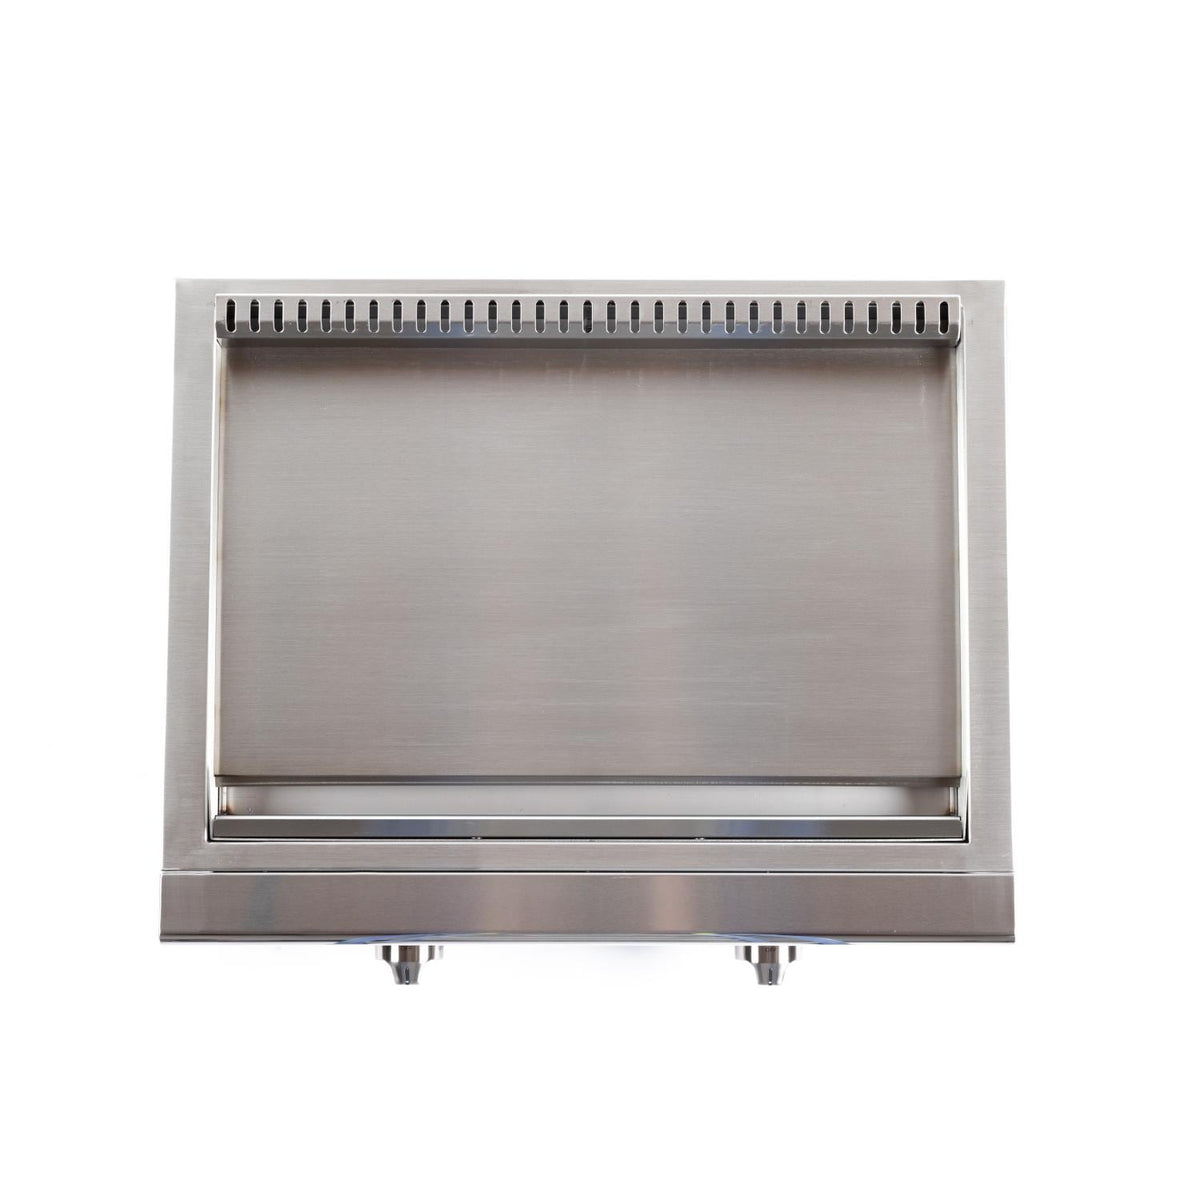 Coyote 30-Inch Built-In Flat Top Natural Gas Grill